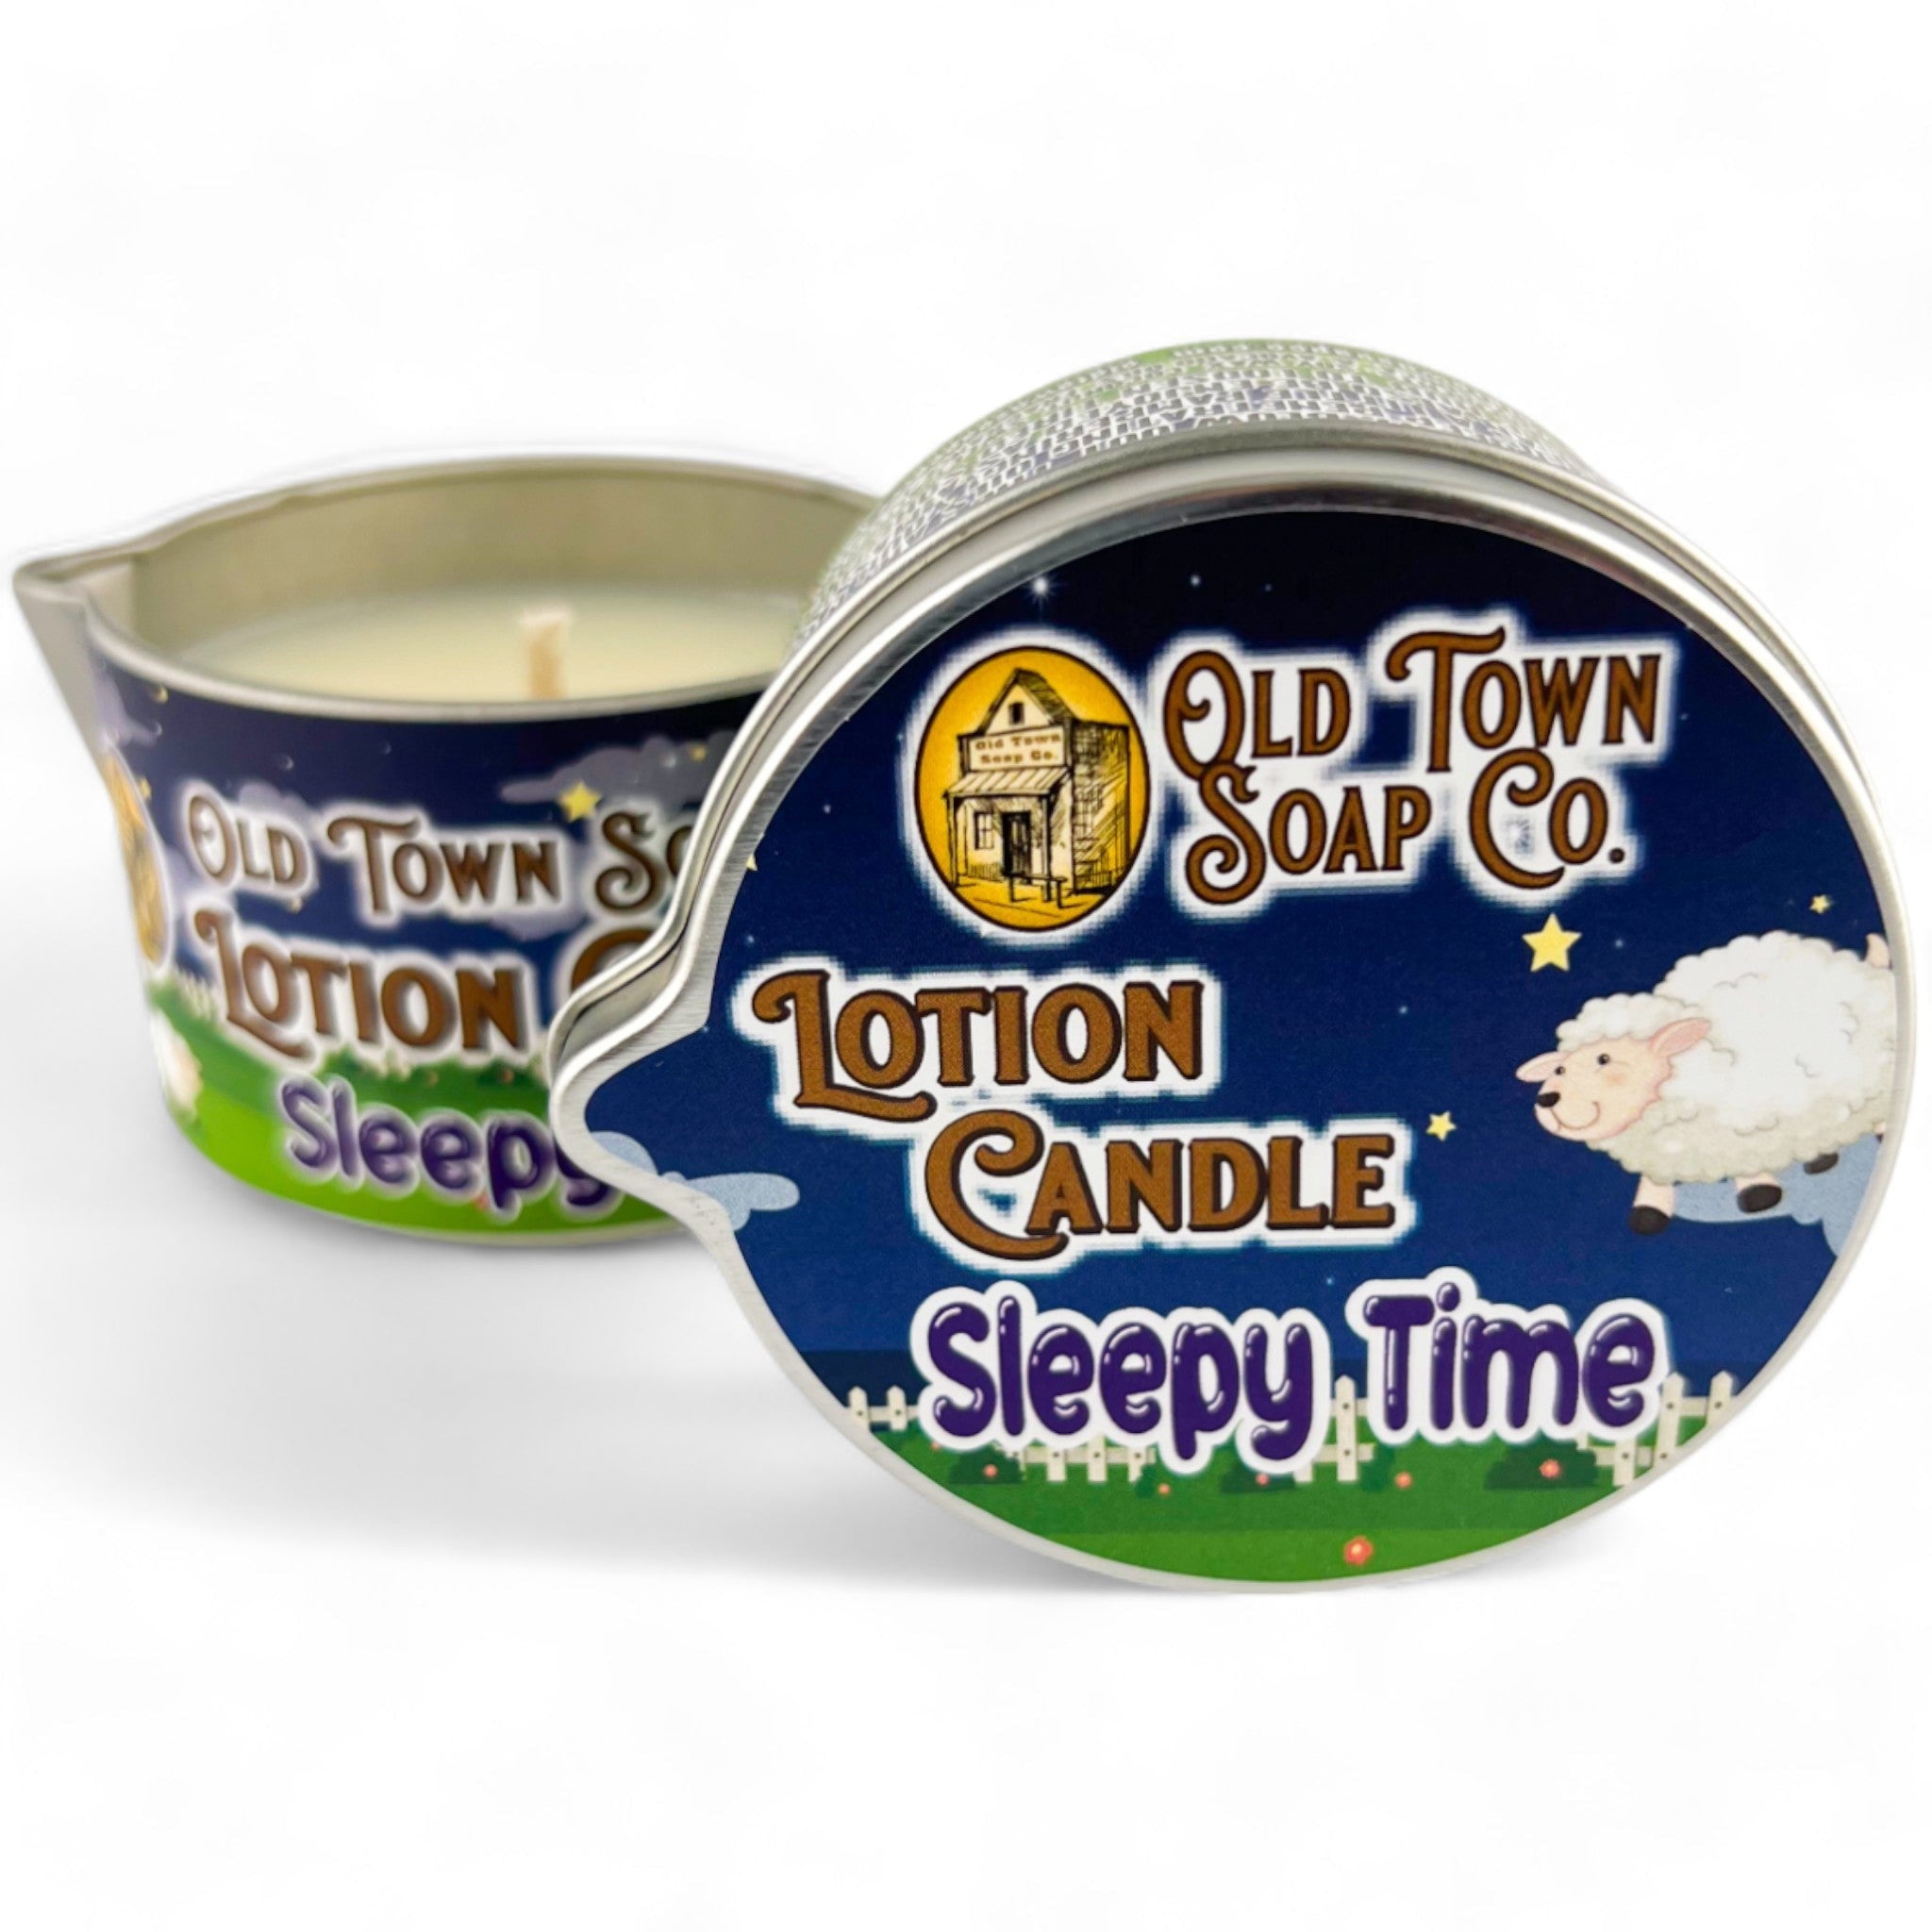 Sleepy Time -Lotion Candles - Old Town Soap Co.